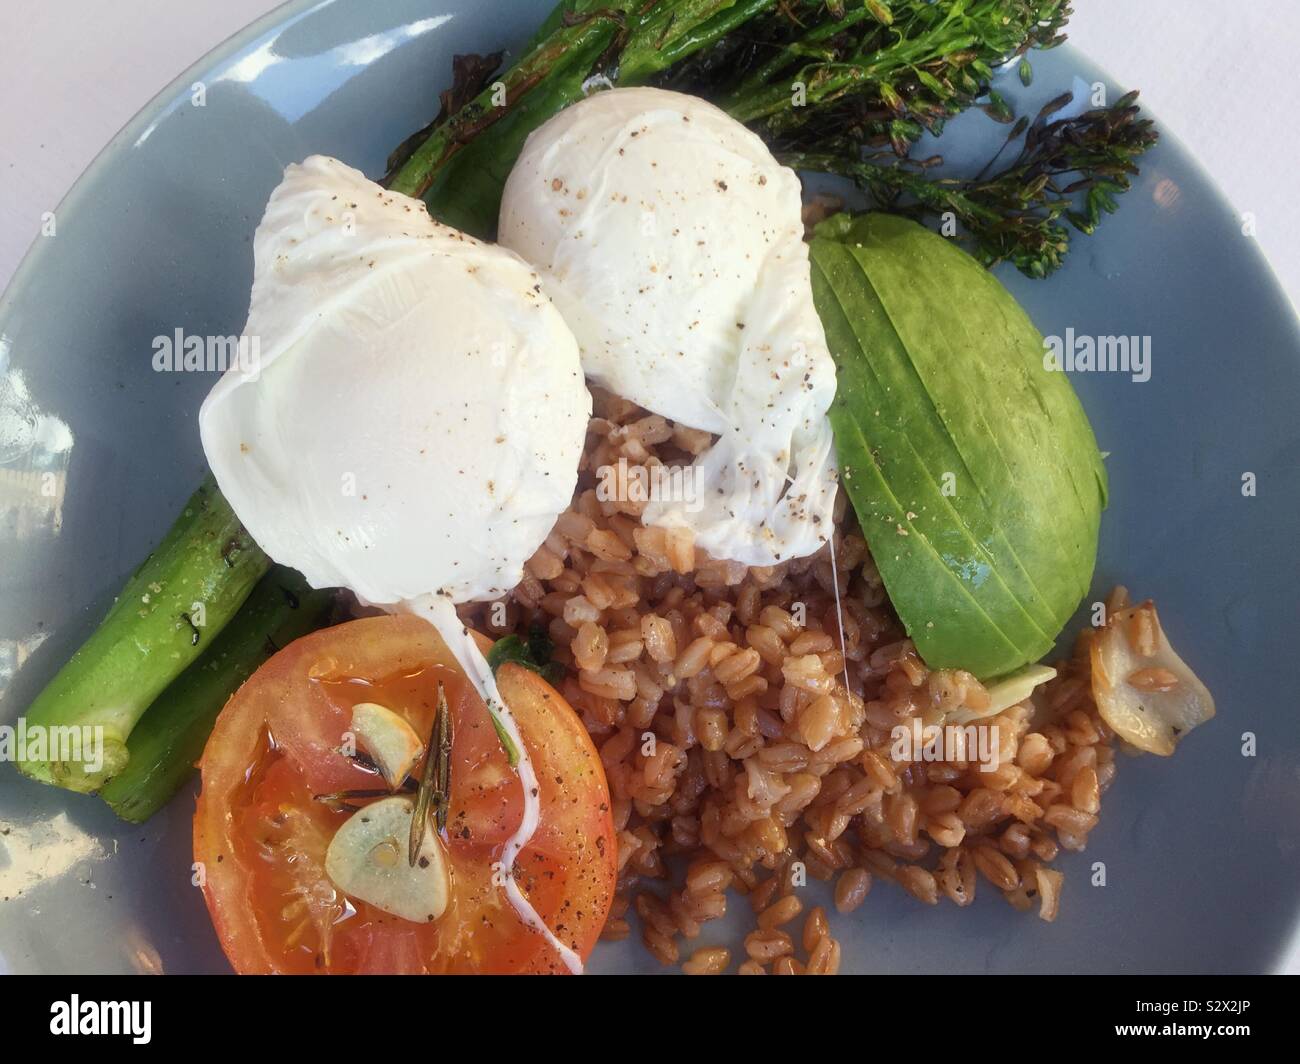 Gourmet meal of poached eggs on a bed of warm Farro grains with tomatoes, avocados and broccolini accompaniments Stock Photo